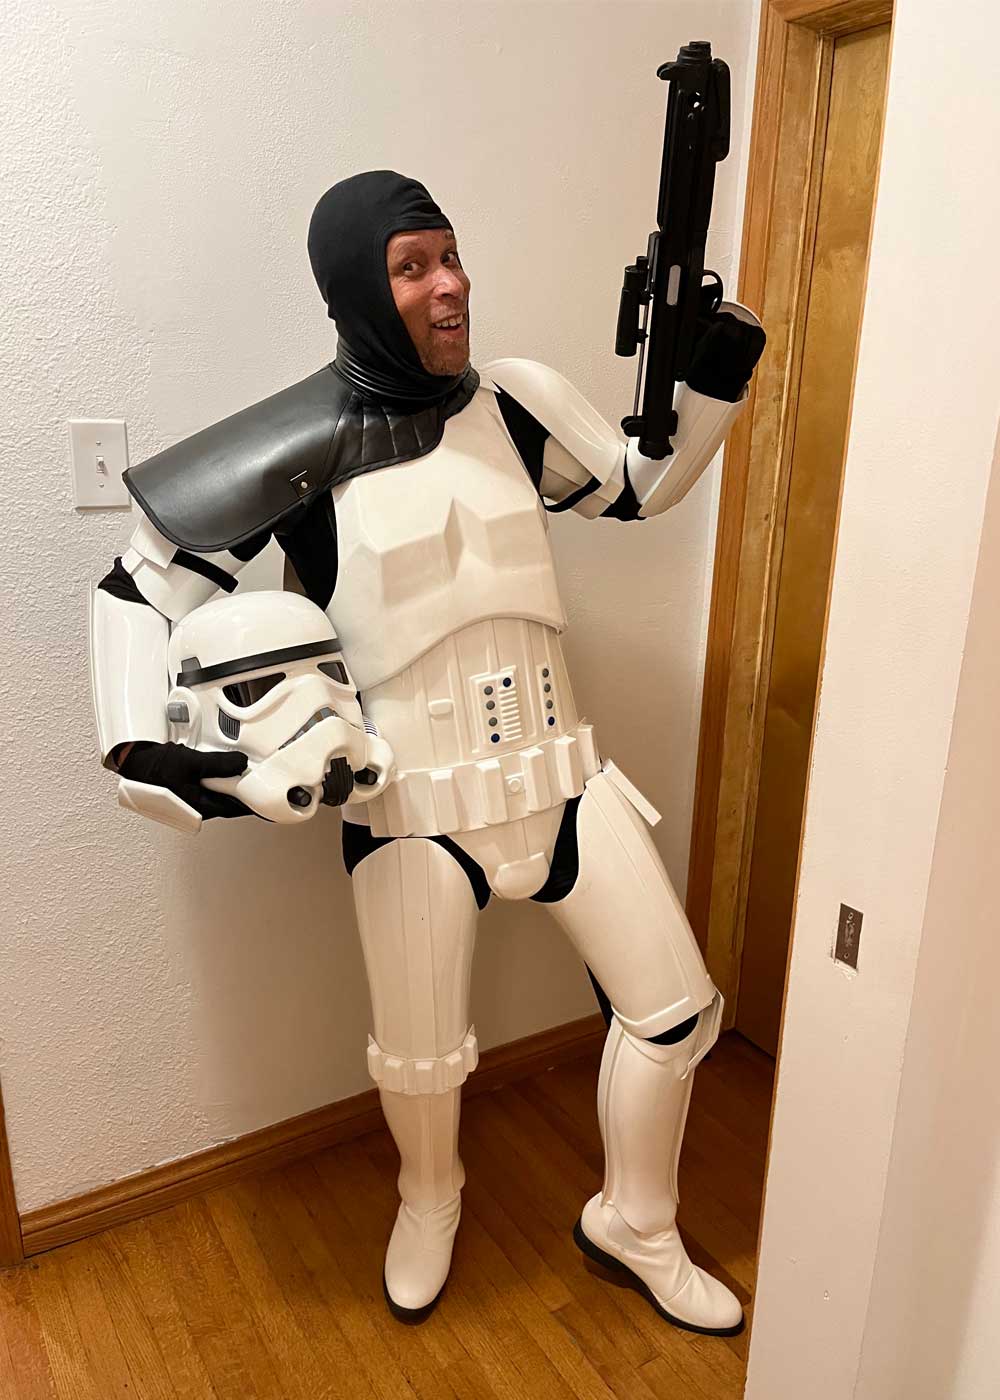 Star Wars Stormtrooper Armour review from Kevin